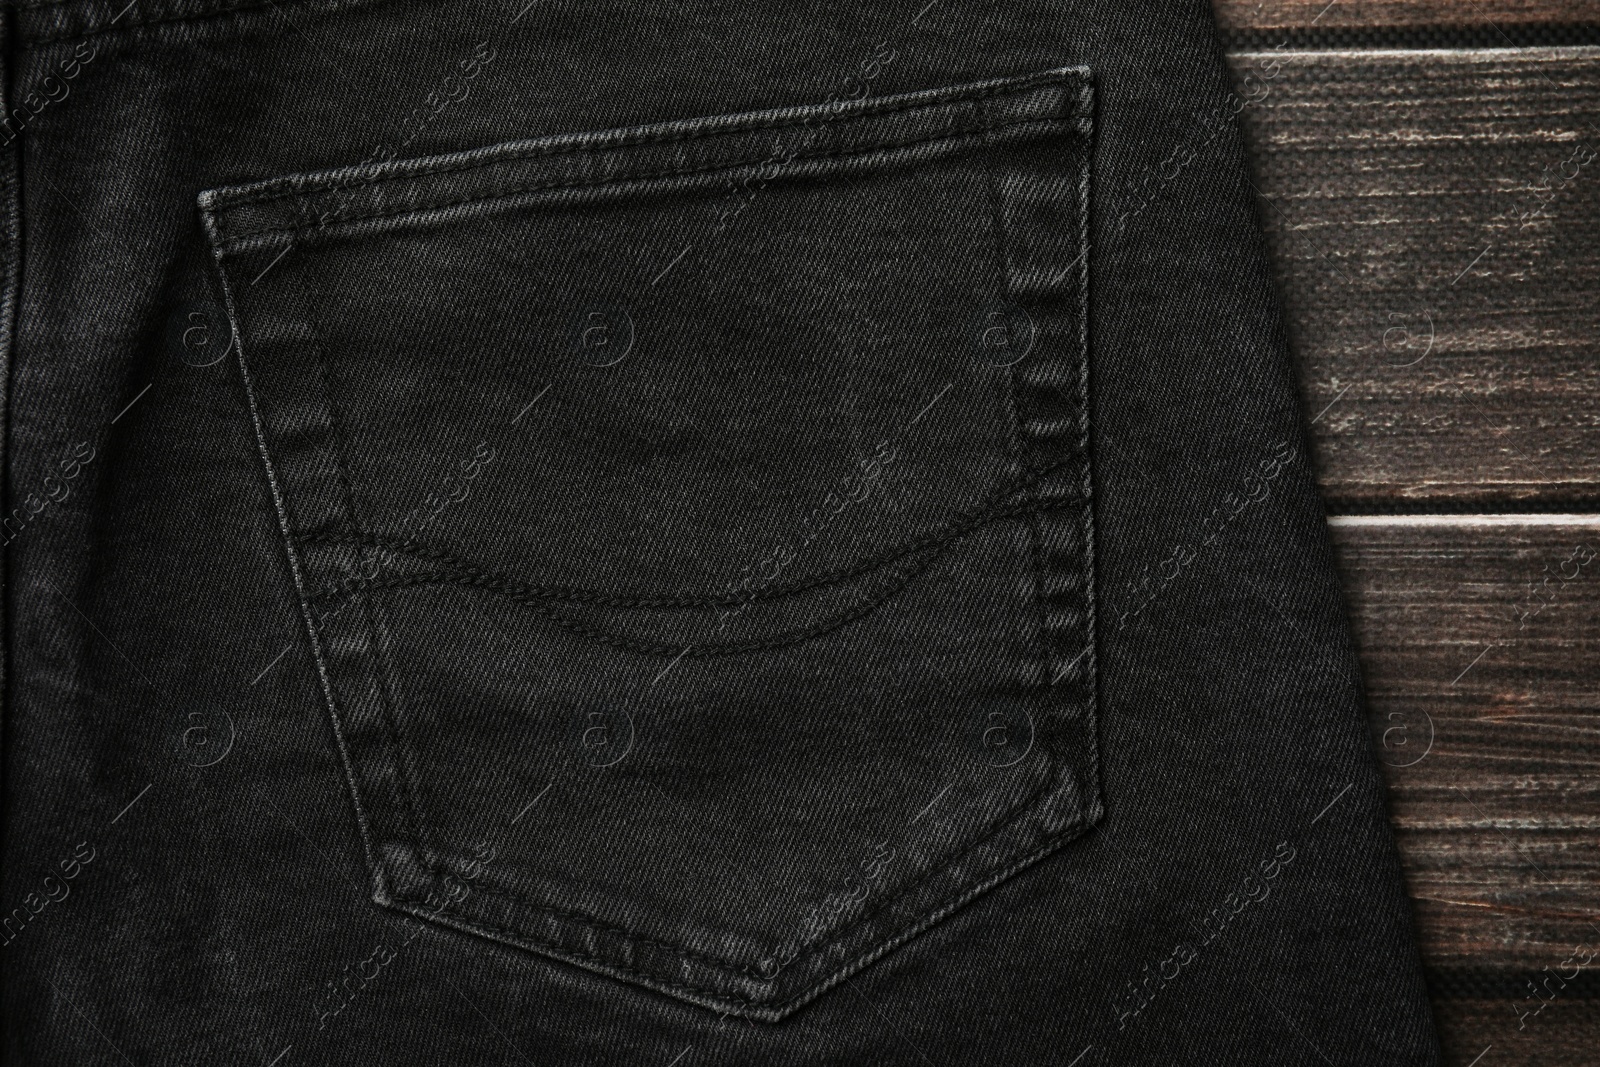 Photo of Black jeans with pocket on wooden background, top view